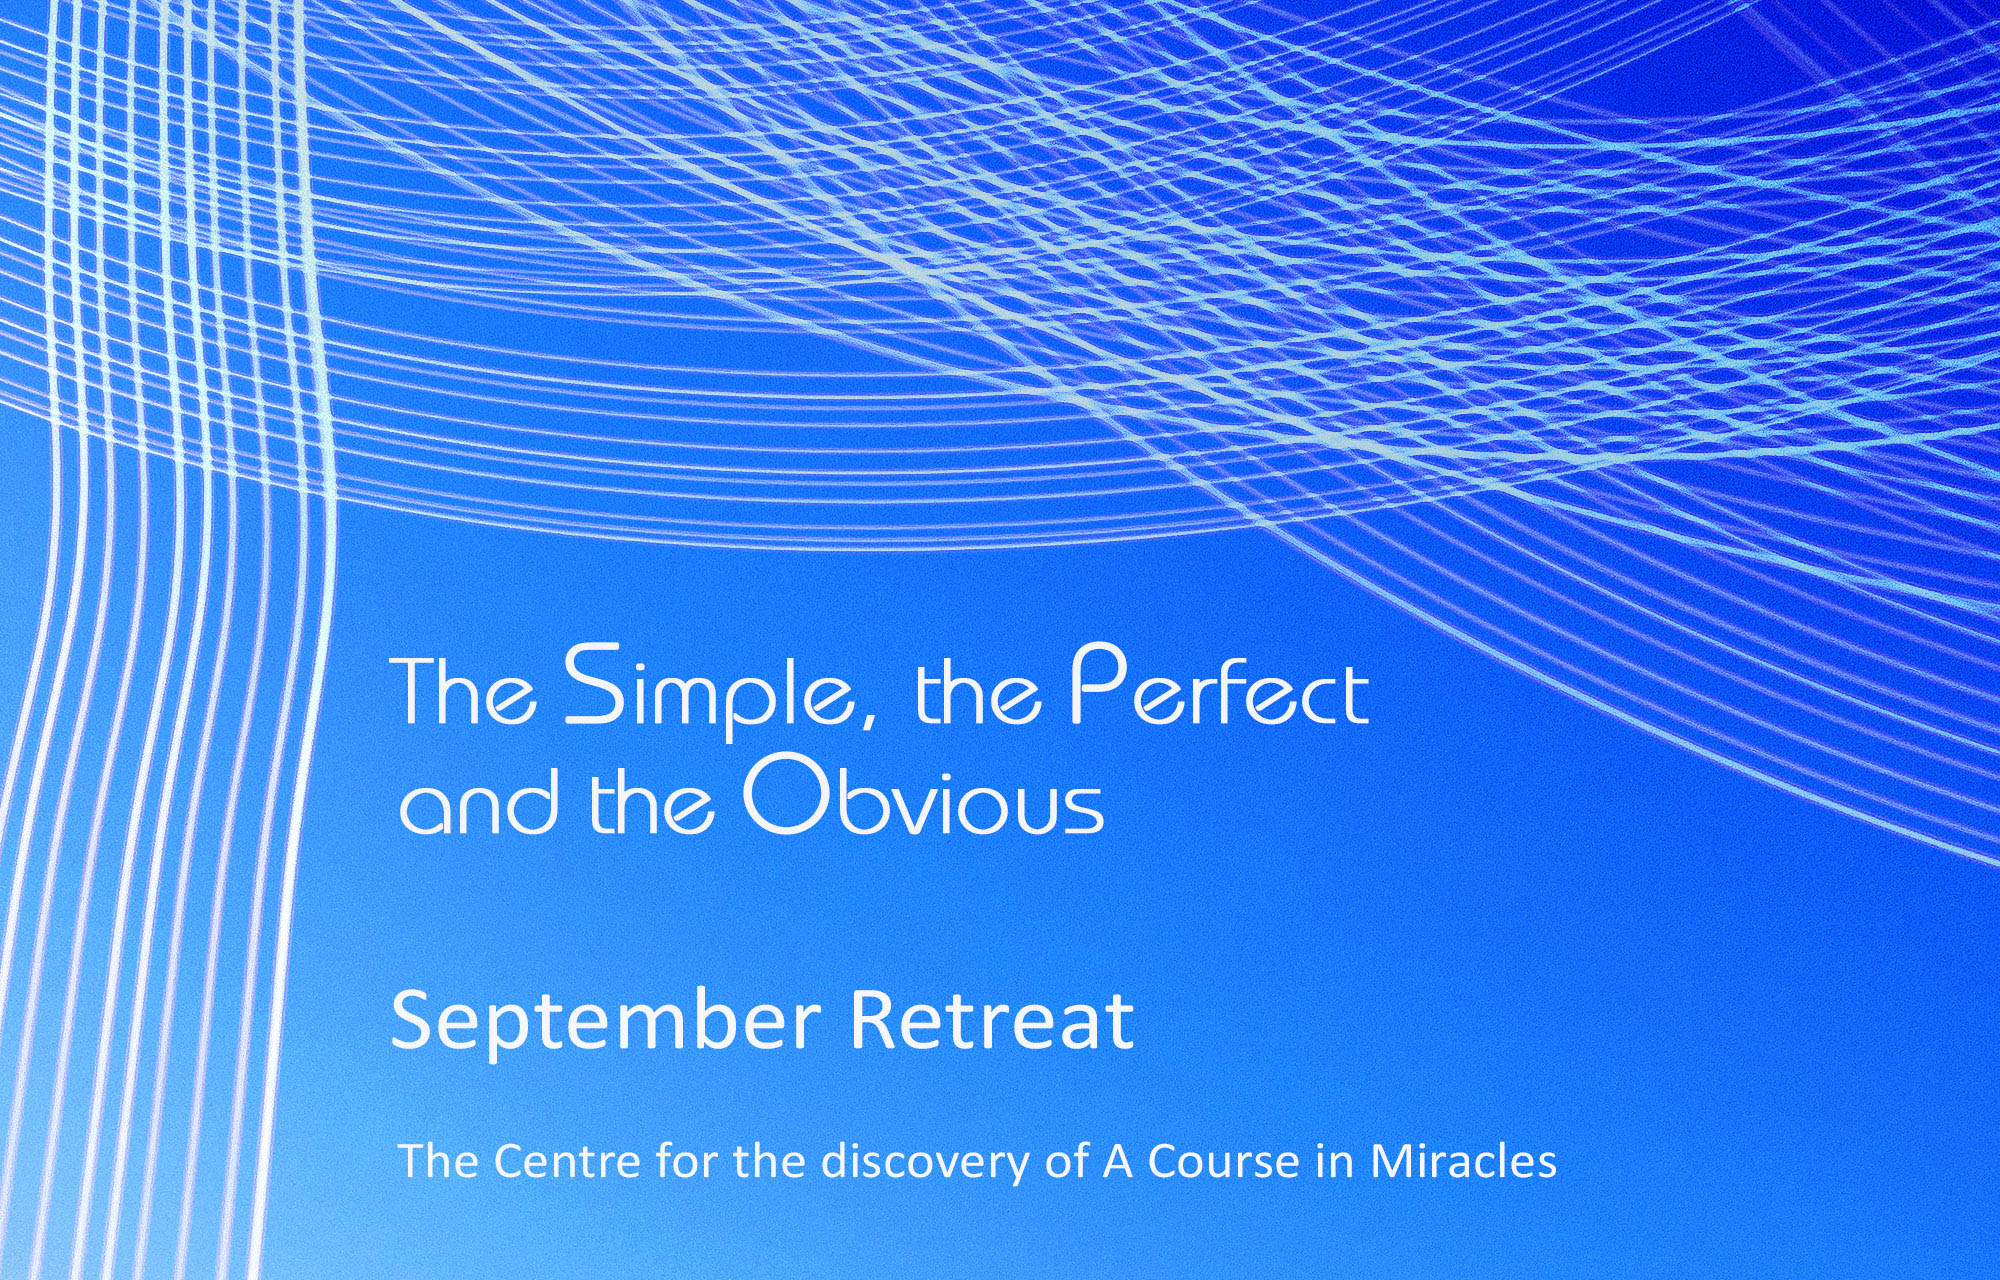 The simple, the perfect and the obvious. September retreat. The centre for the discovery of a course in miracles